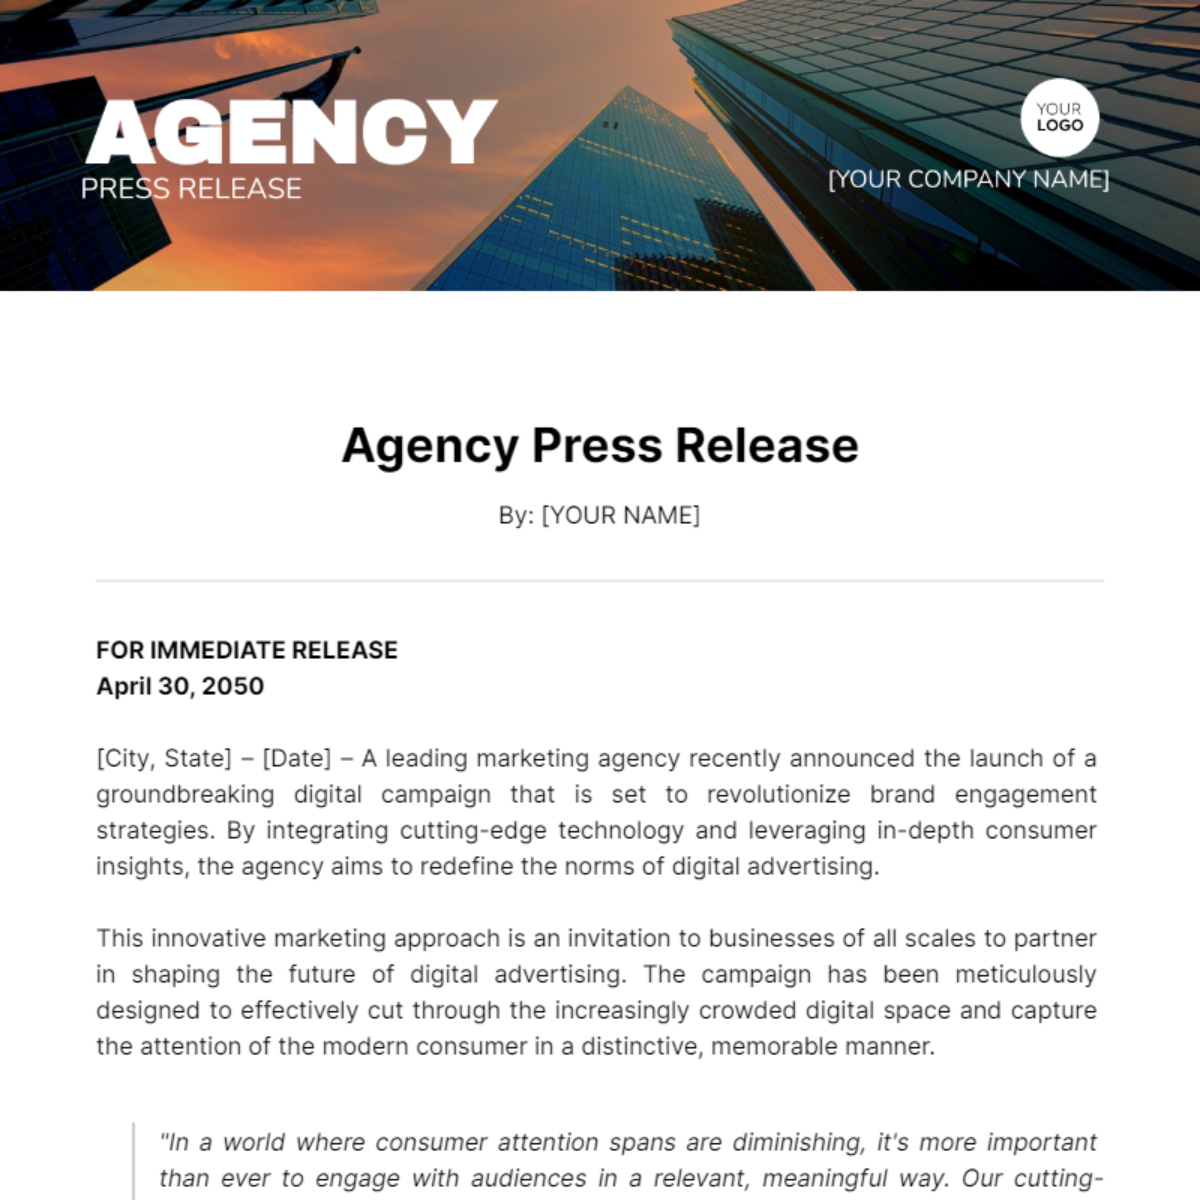 Free Agency Press Release Template